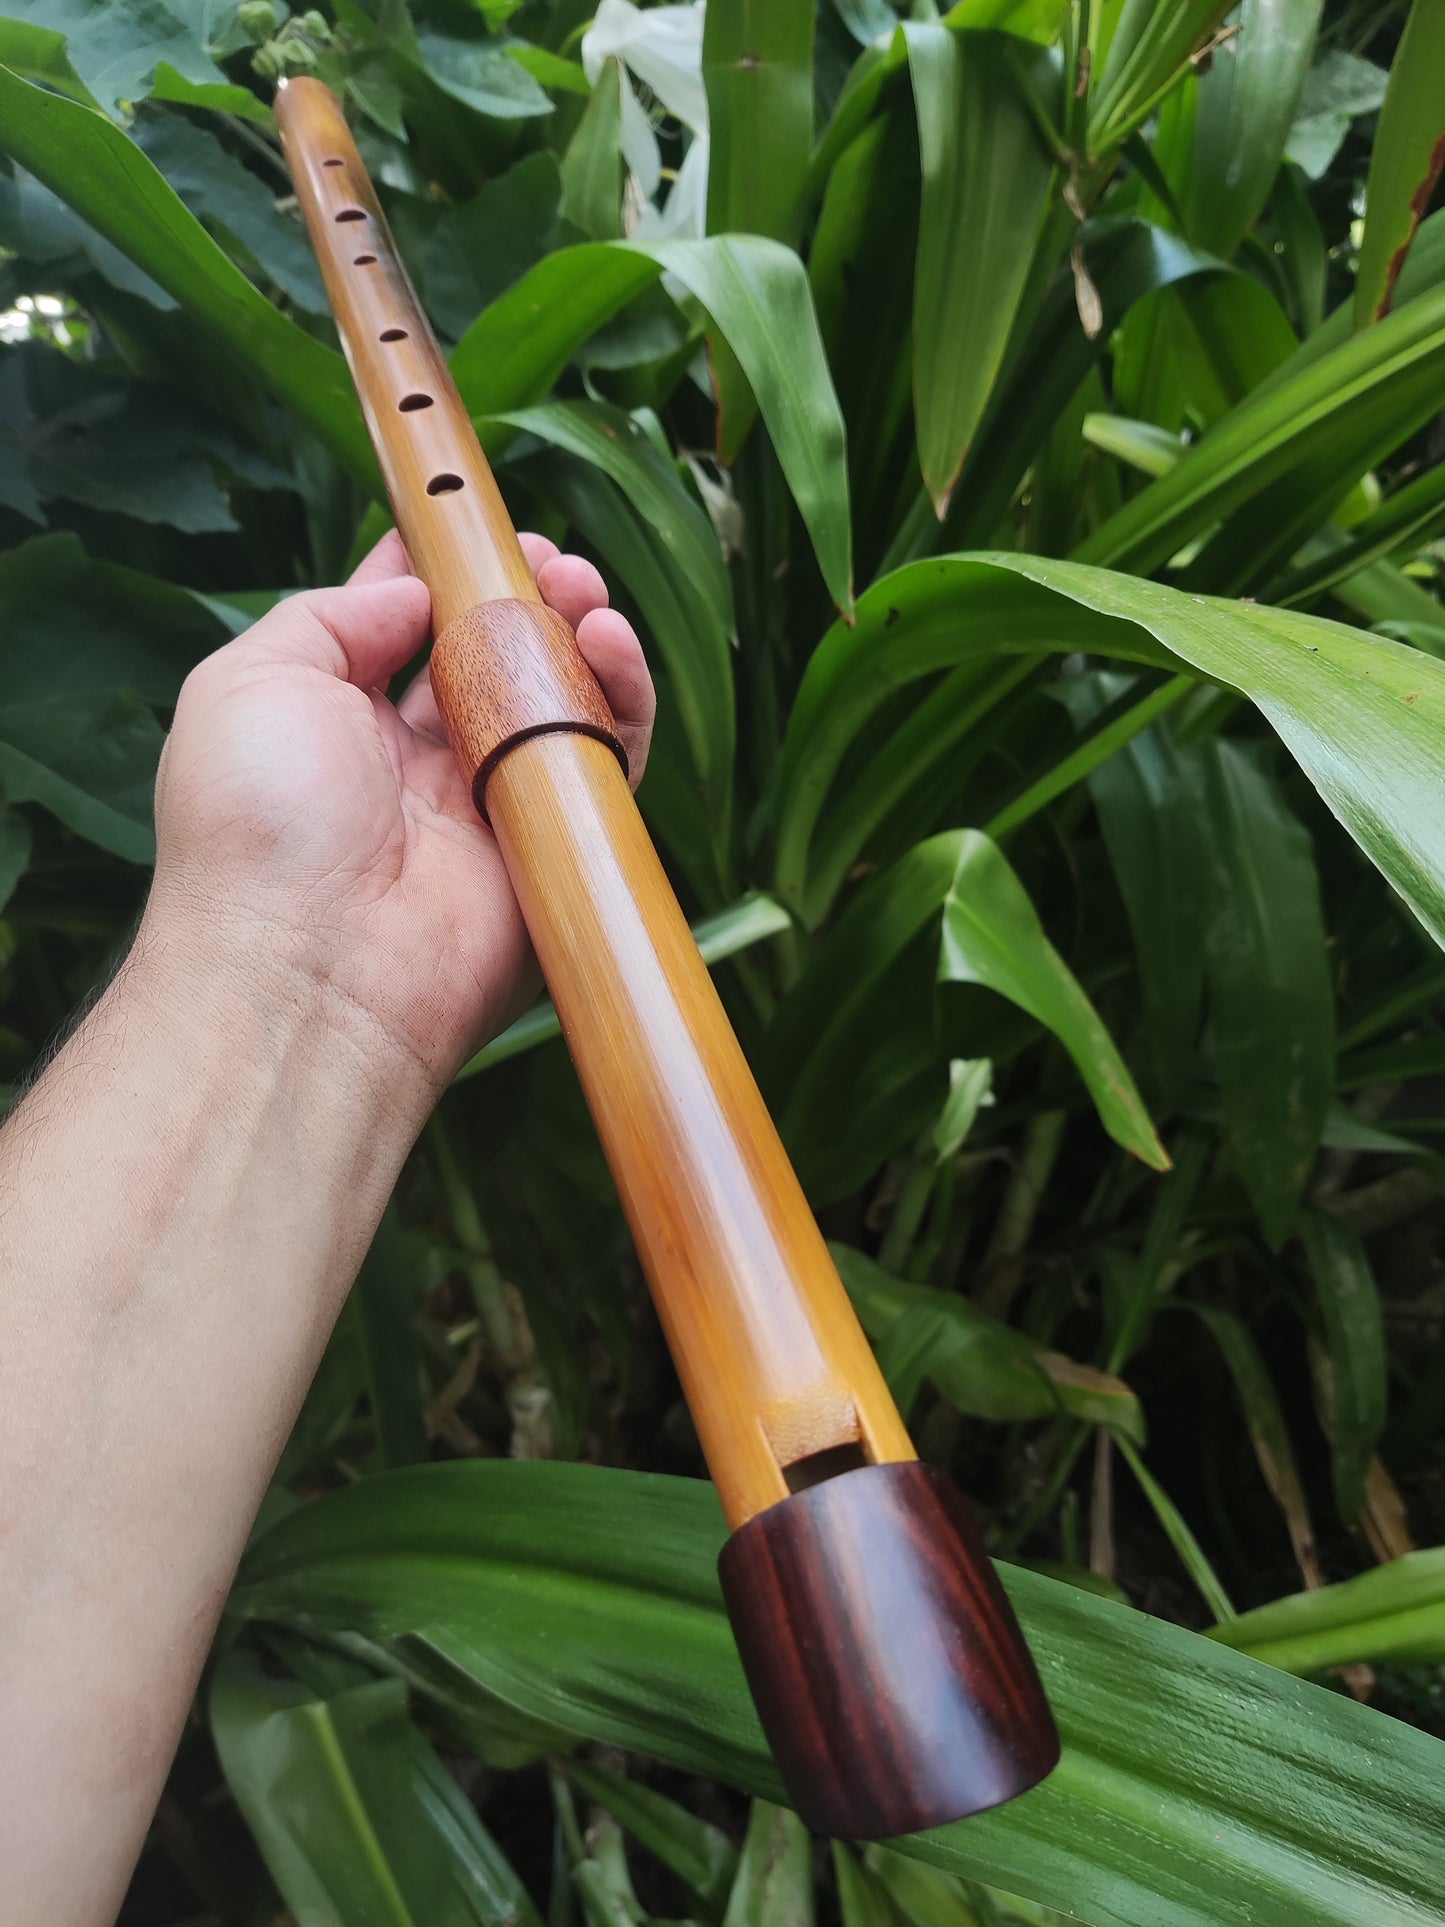 Low D Whistle, handmade out of Bamboo by Rui Gomes